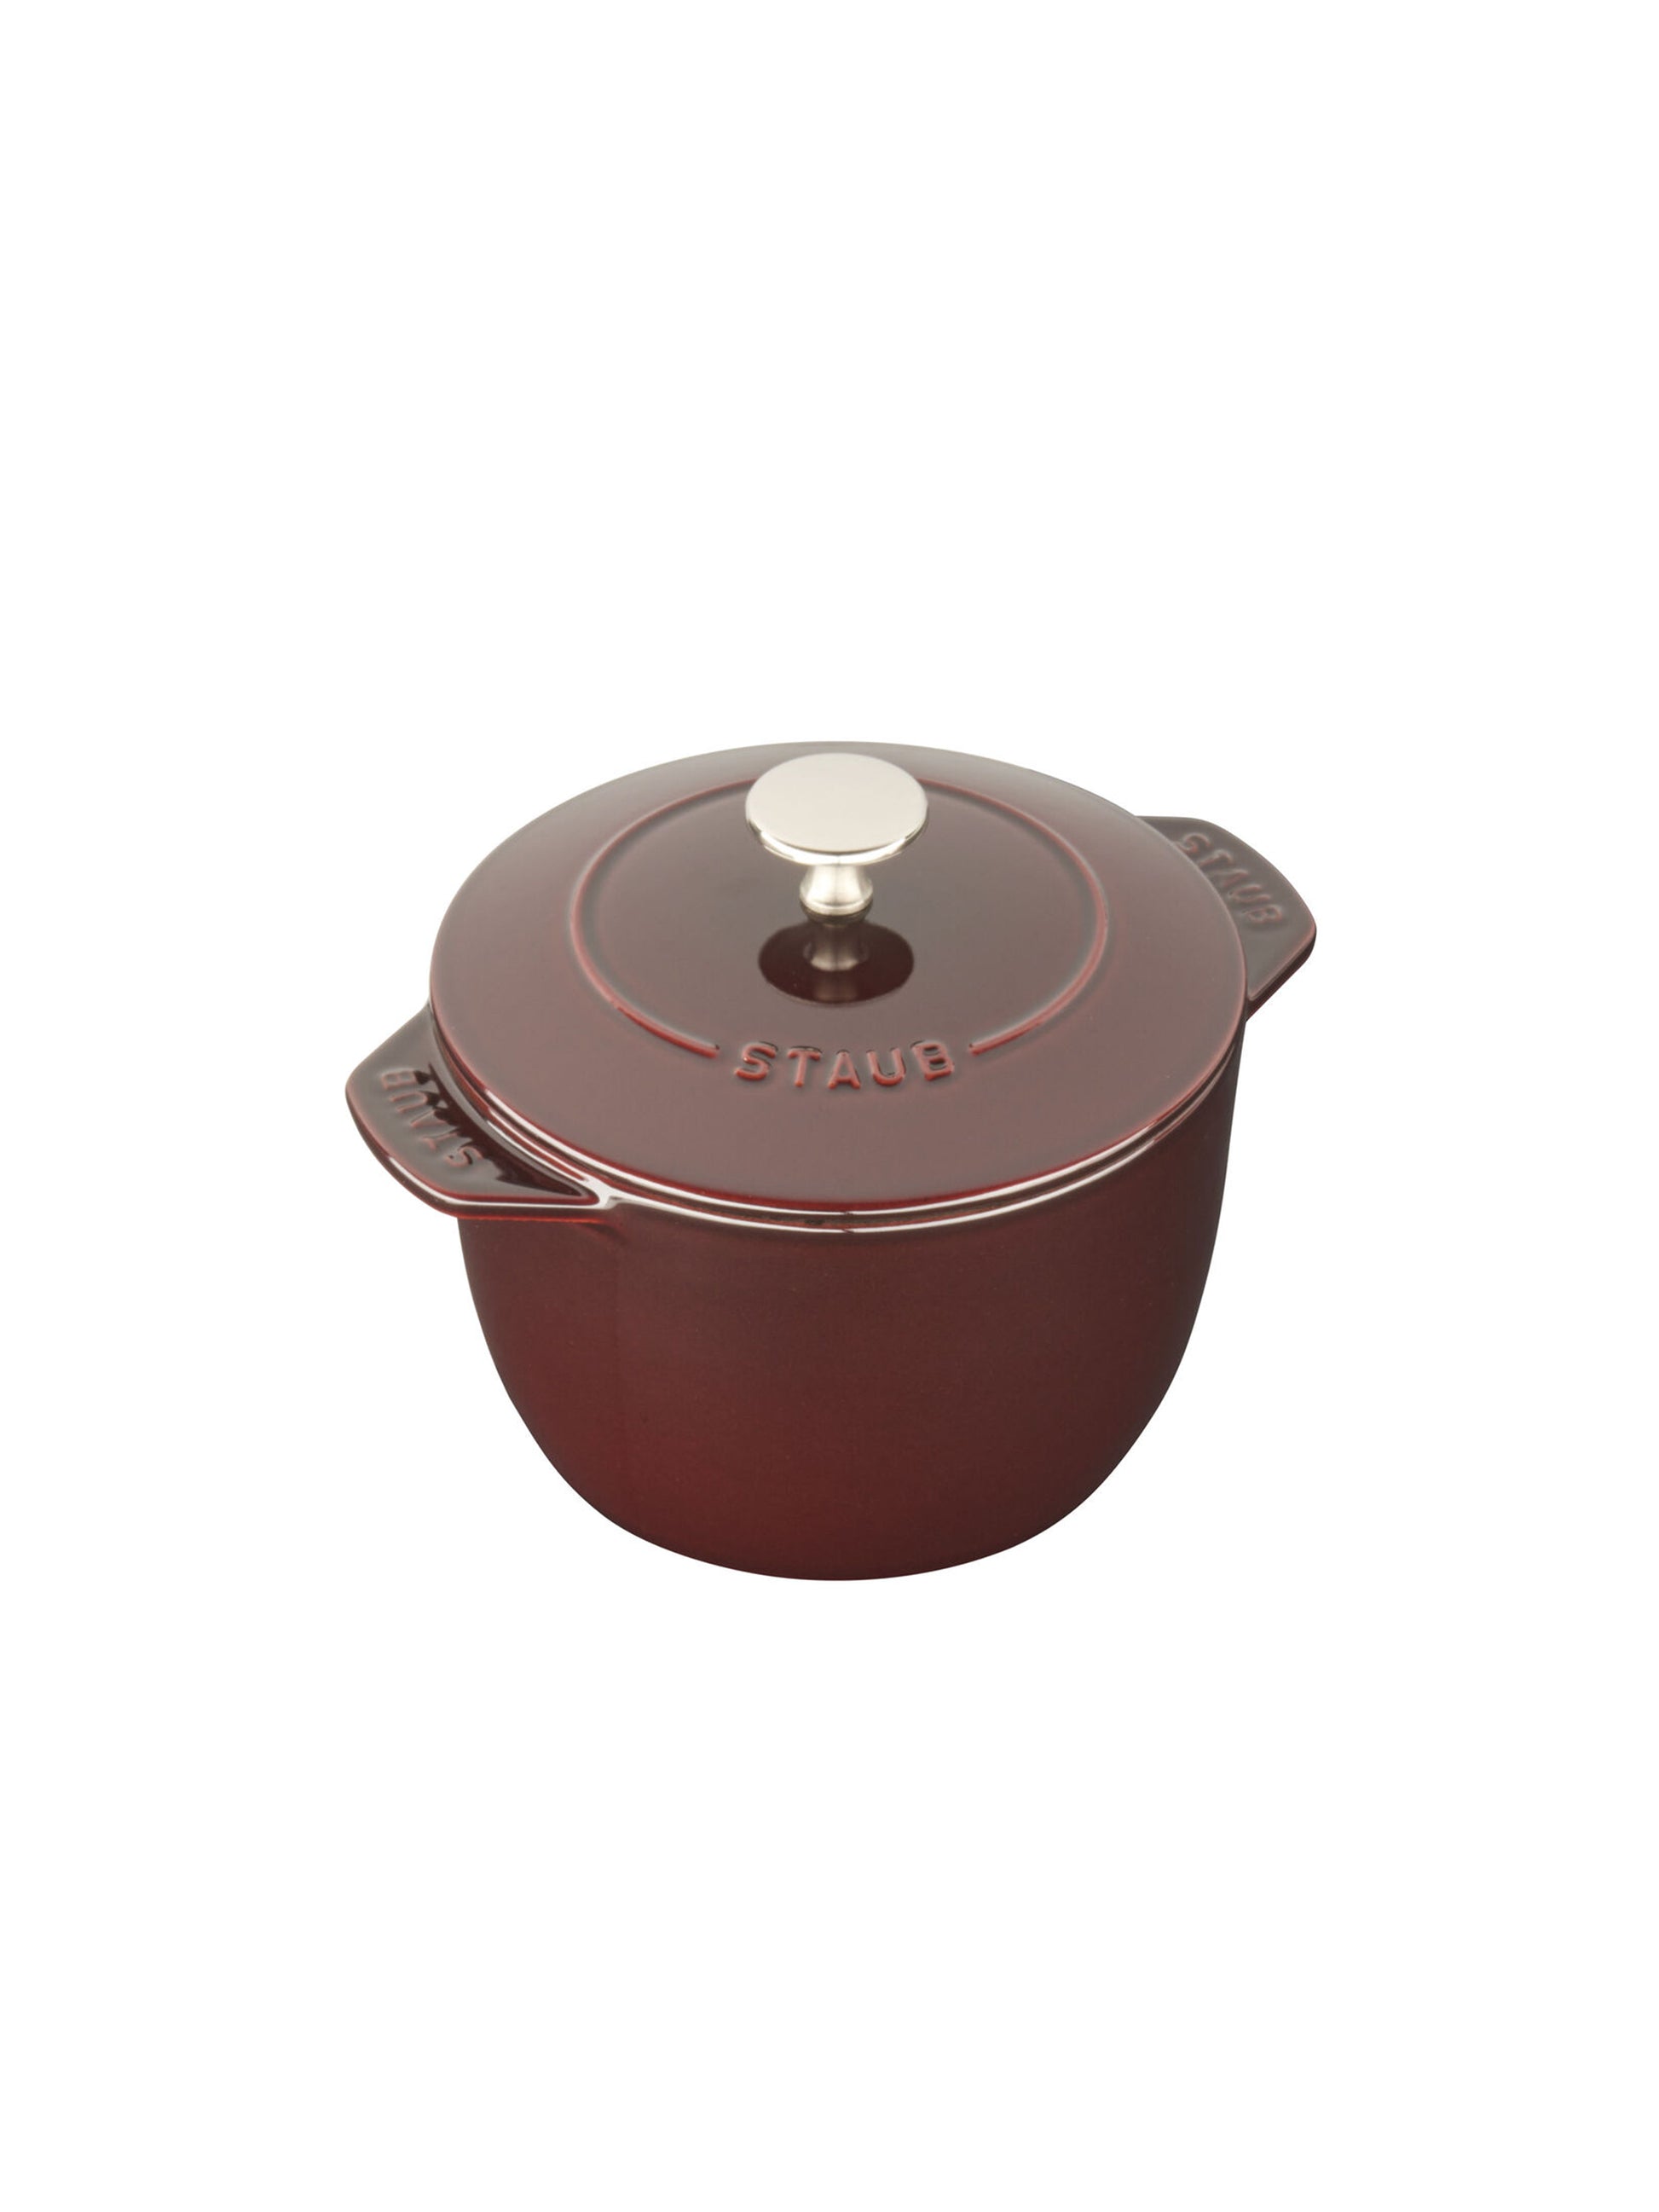 Staub Cast Iron 1.5-qt Petite French Oven - Grenadine, Made in France